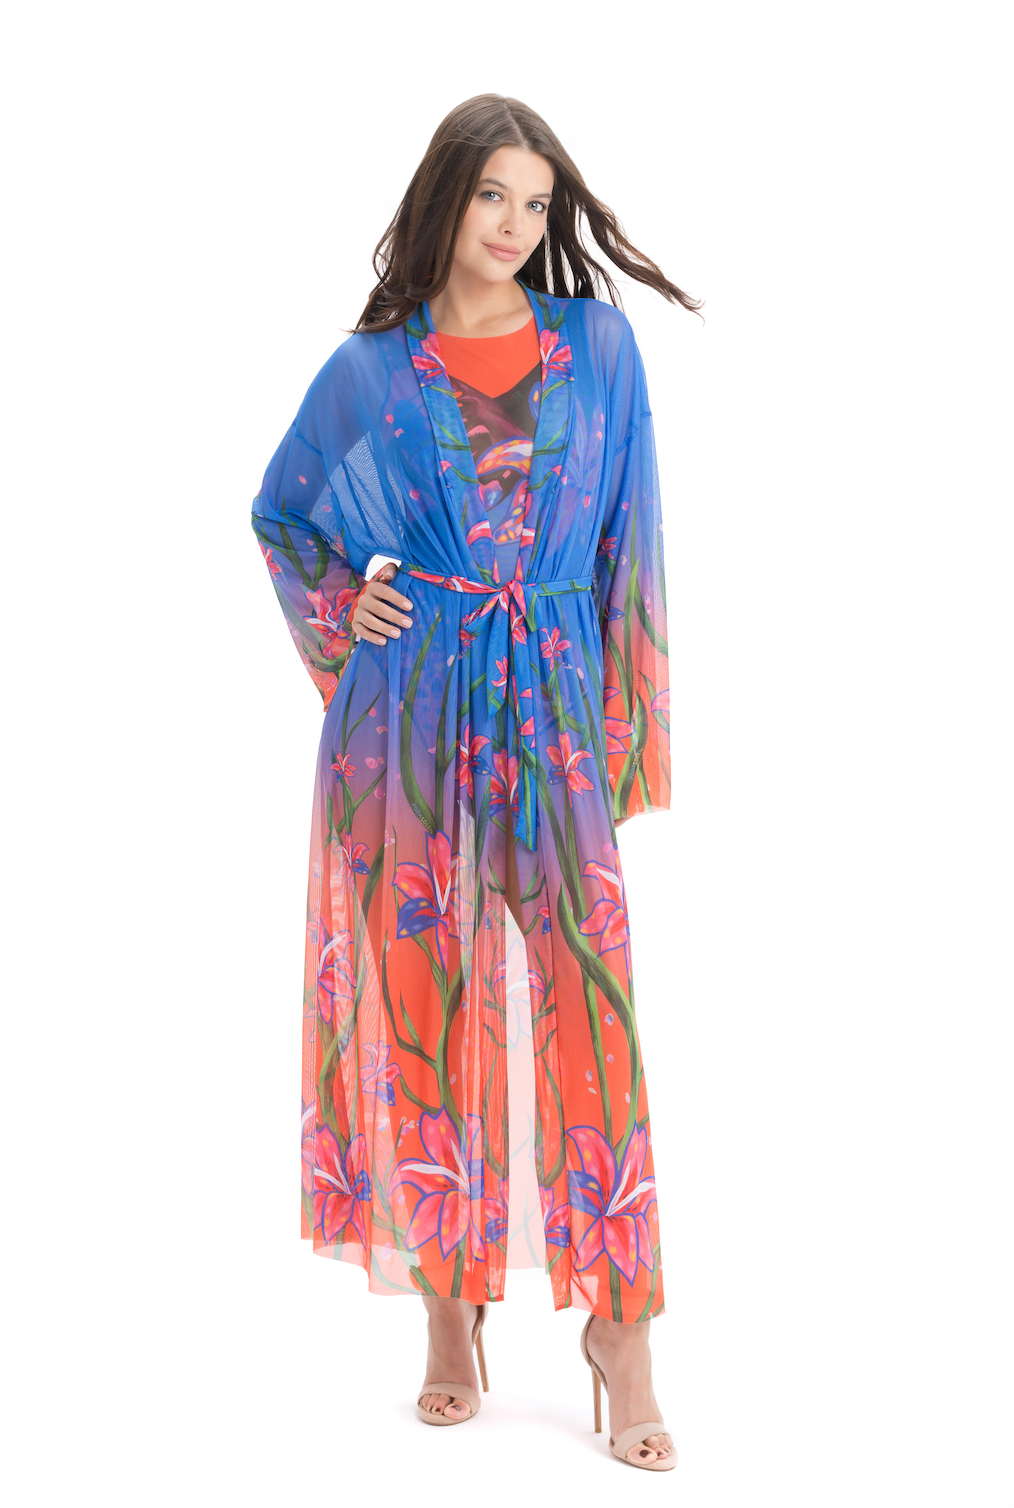 Our luxurious Lily print beach robe offers not only timeless style but also SPF35 protection to keep you safe under the sun. This elegant and sustainable piece is perfect for elevating your beach attire. Additionally, explore our innovative swimwear collection designed for both fashion and function.